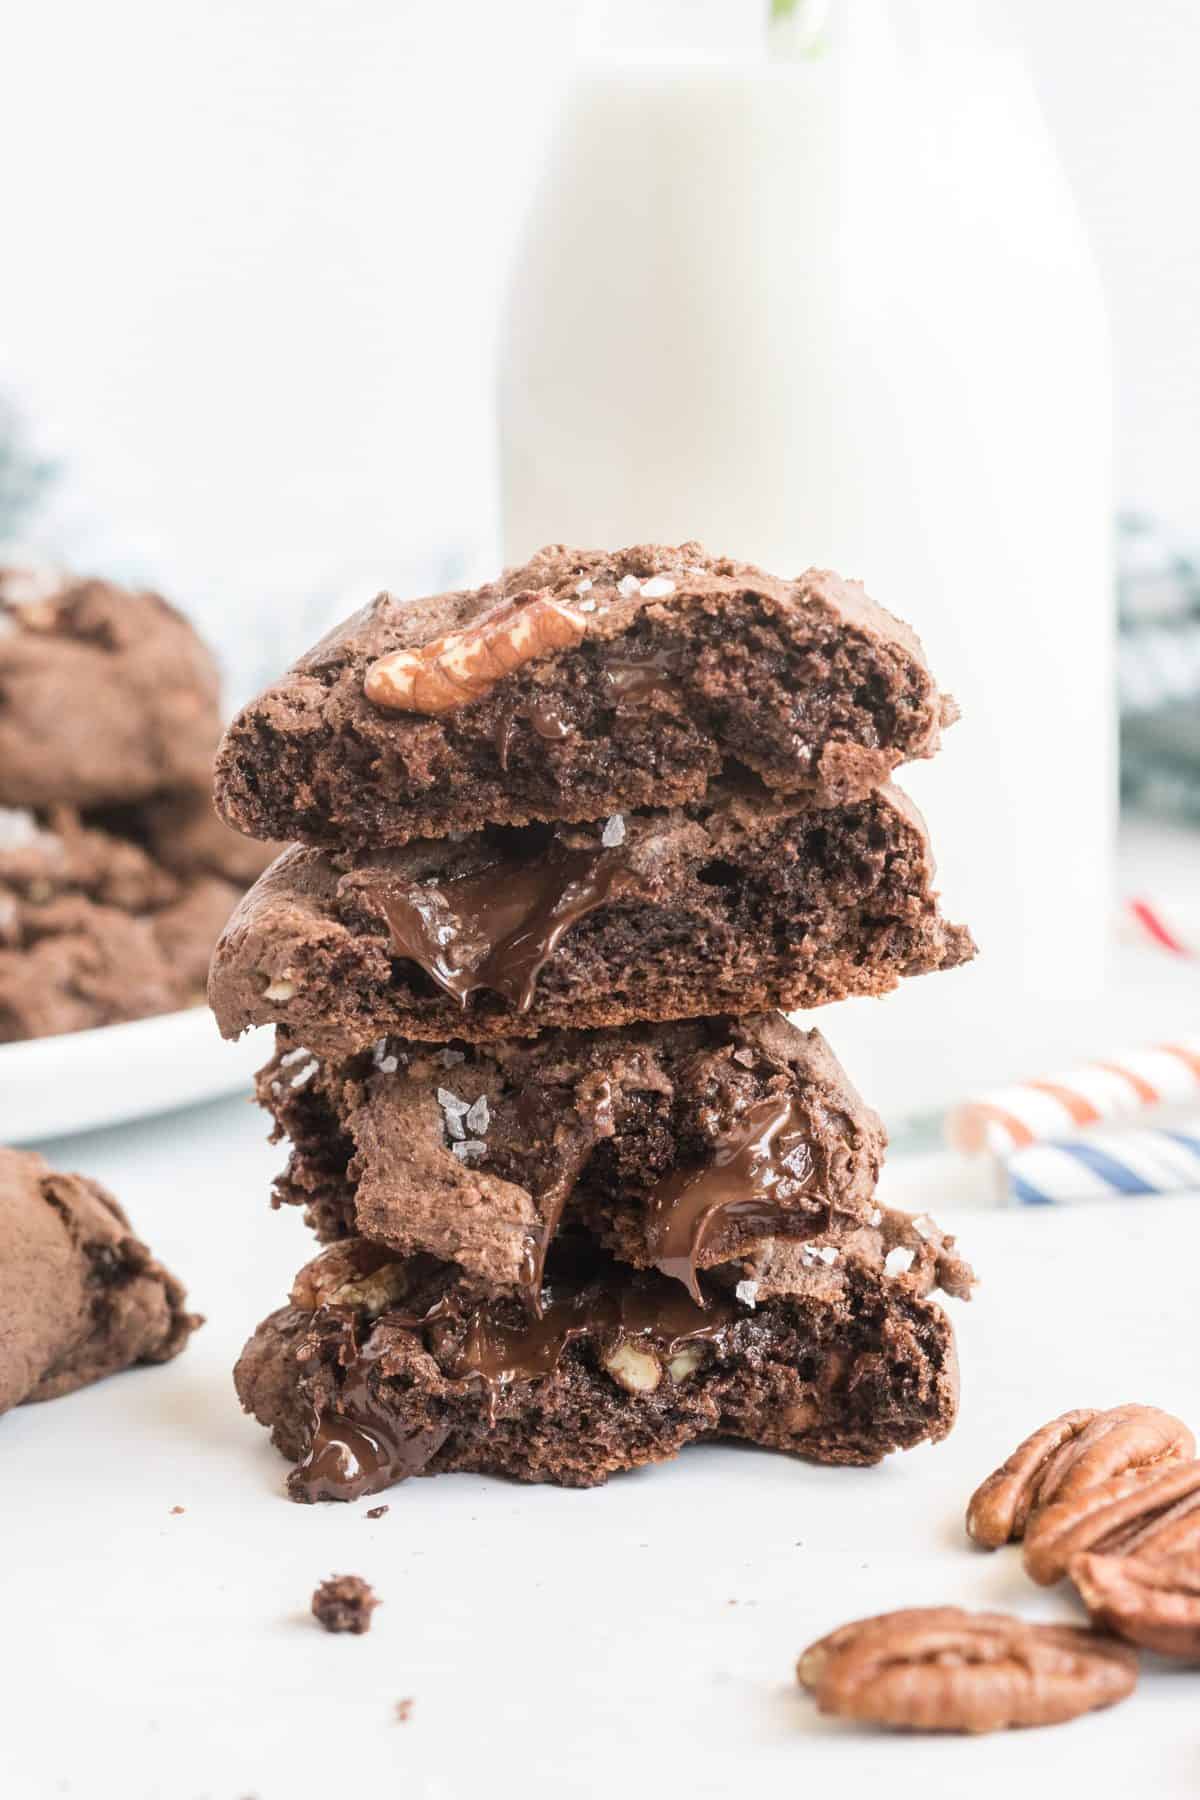 Chocolate cake mix cookies cut in half and stacked, with jug of milk in background.